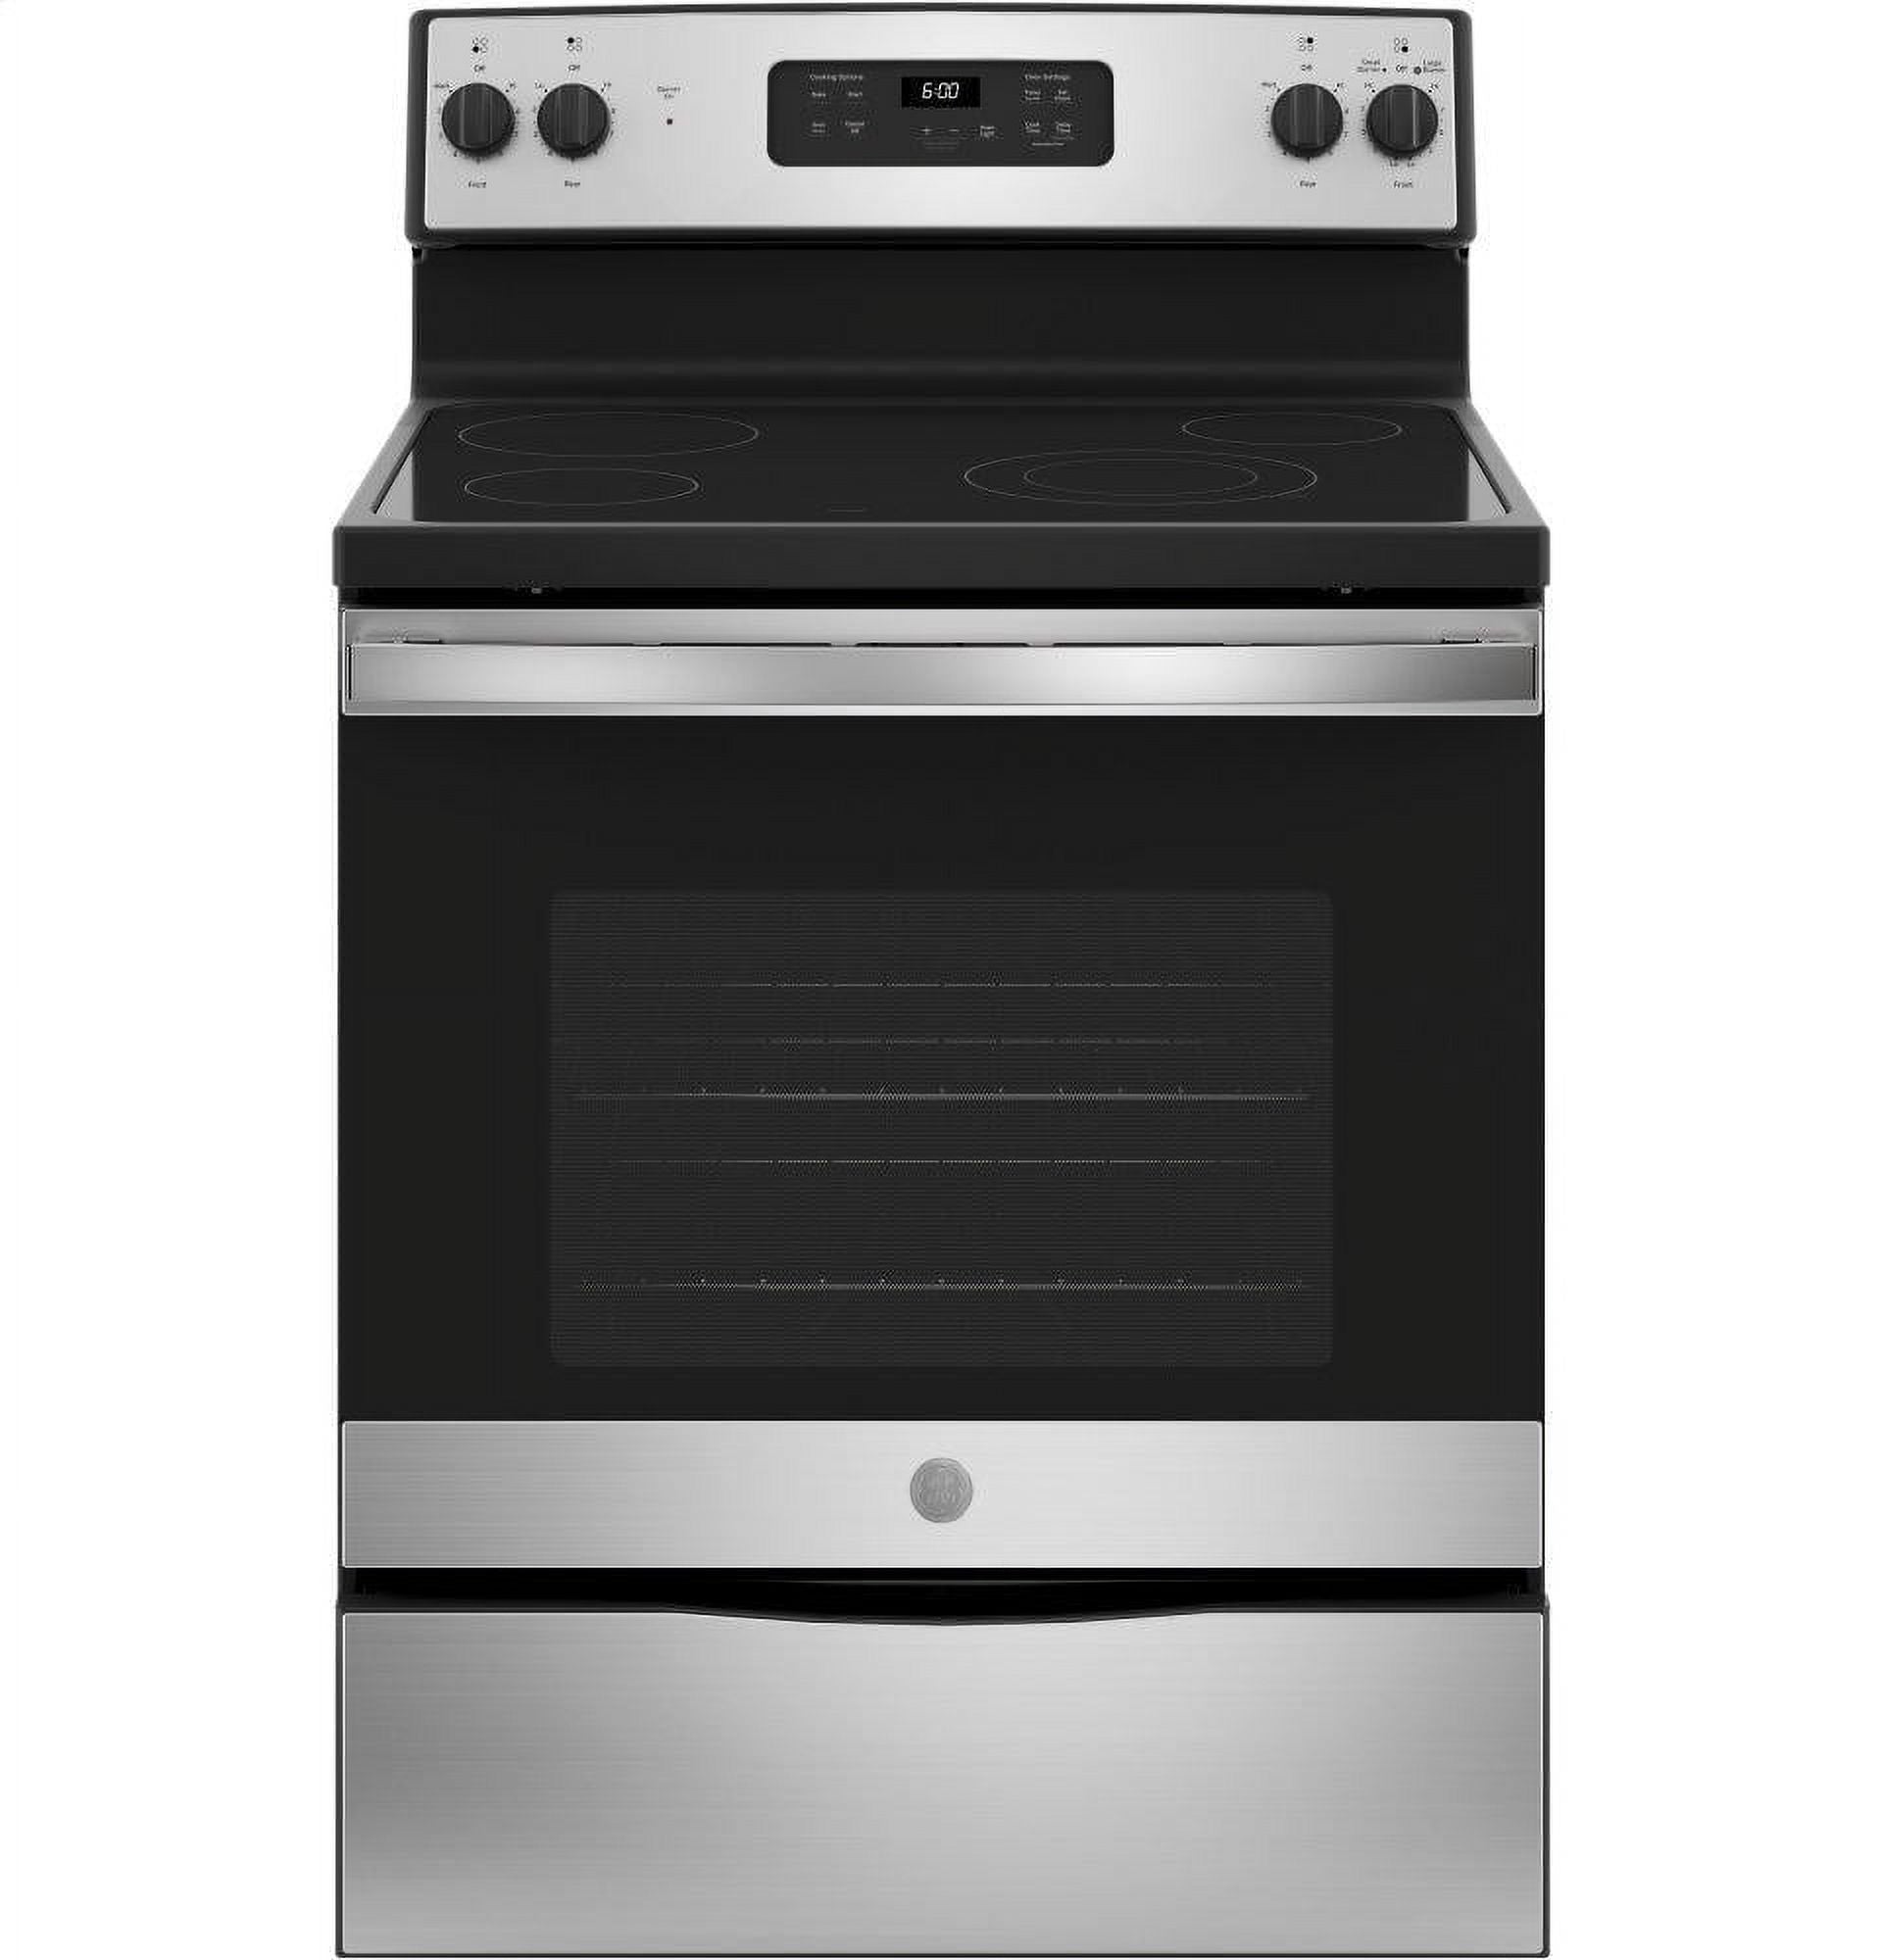 GE - 5.3 Cu. Ft. Freestanding Electric Range with Manual Cleaning - Stainless Steel